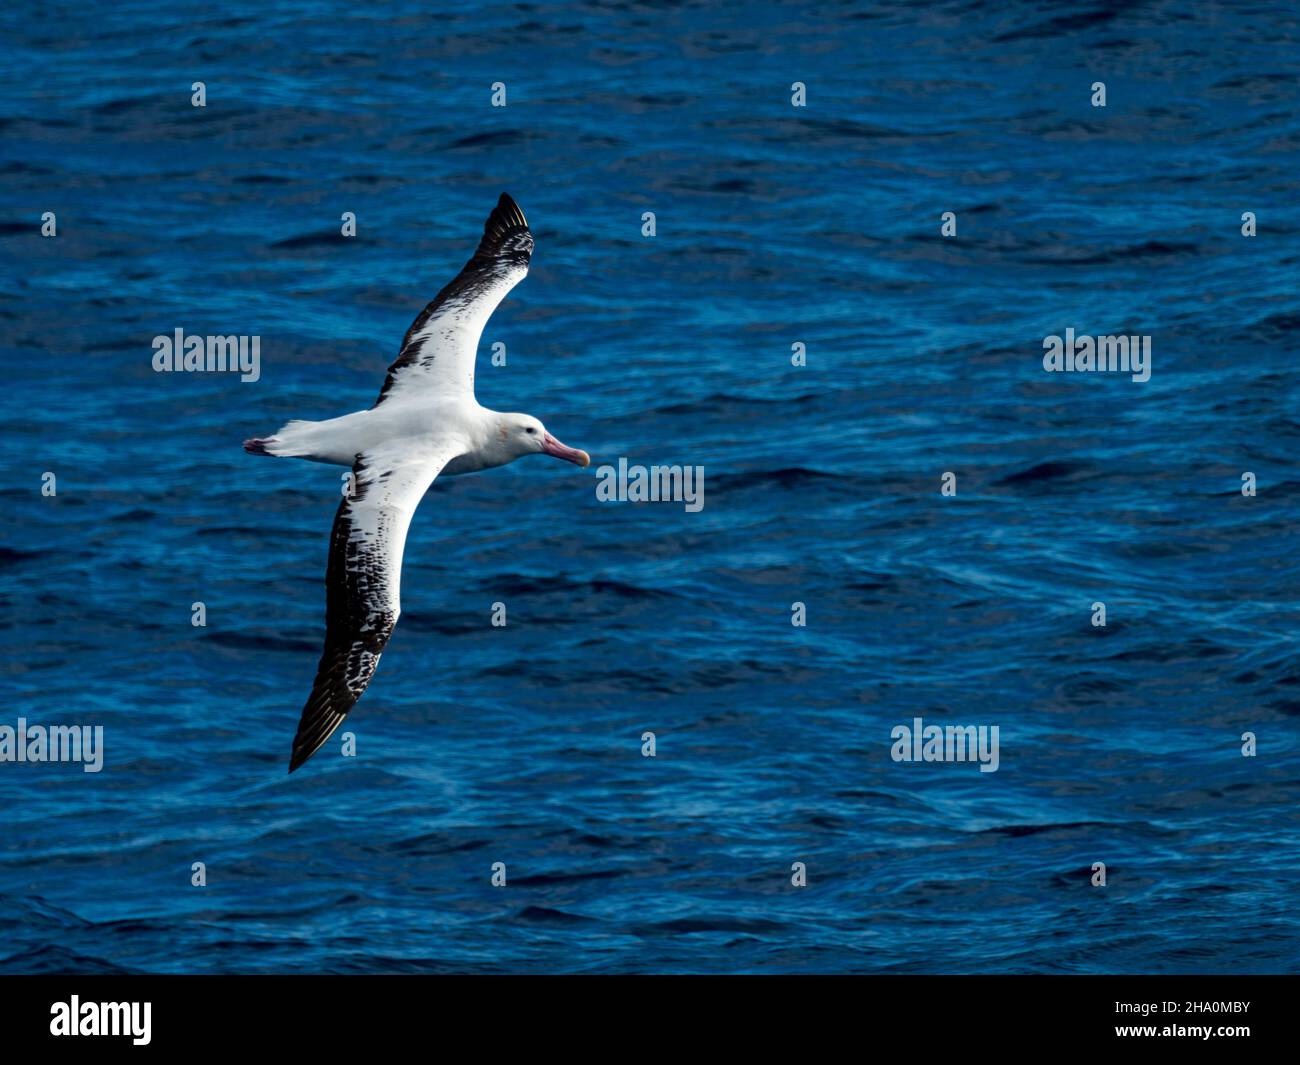 A Wandering albatross, Diomedea exulans, glides over the southern ocean Stock Photo